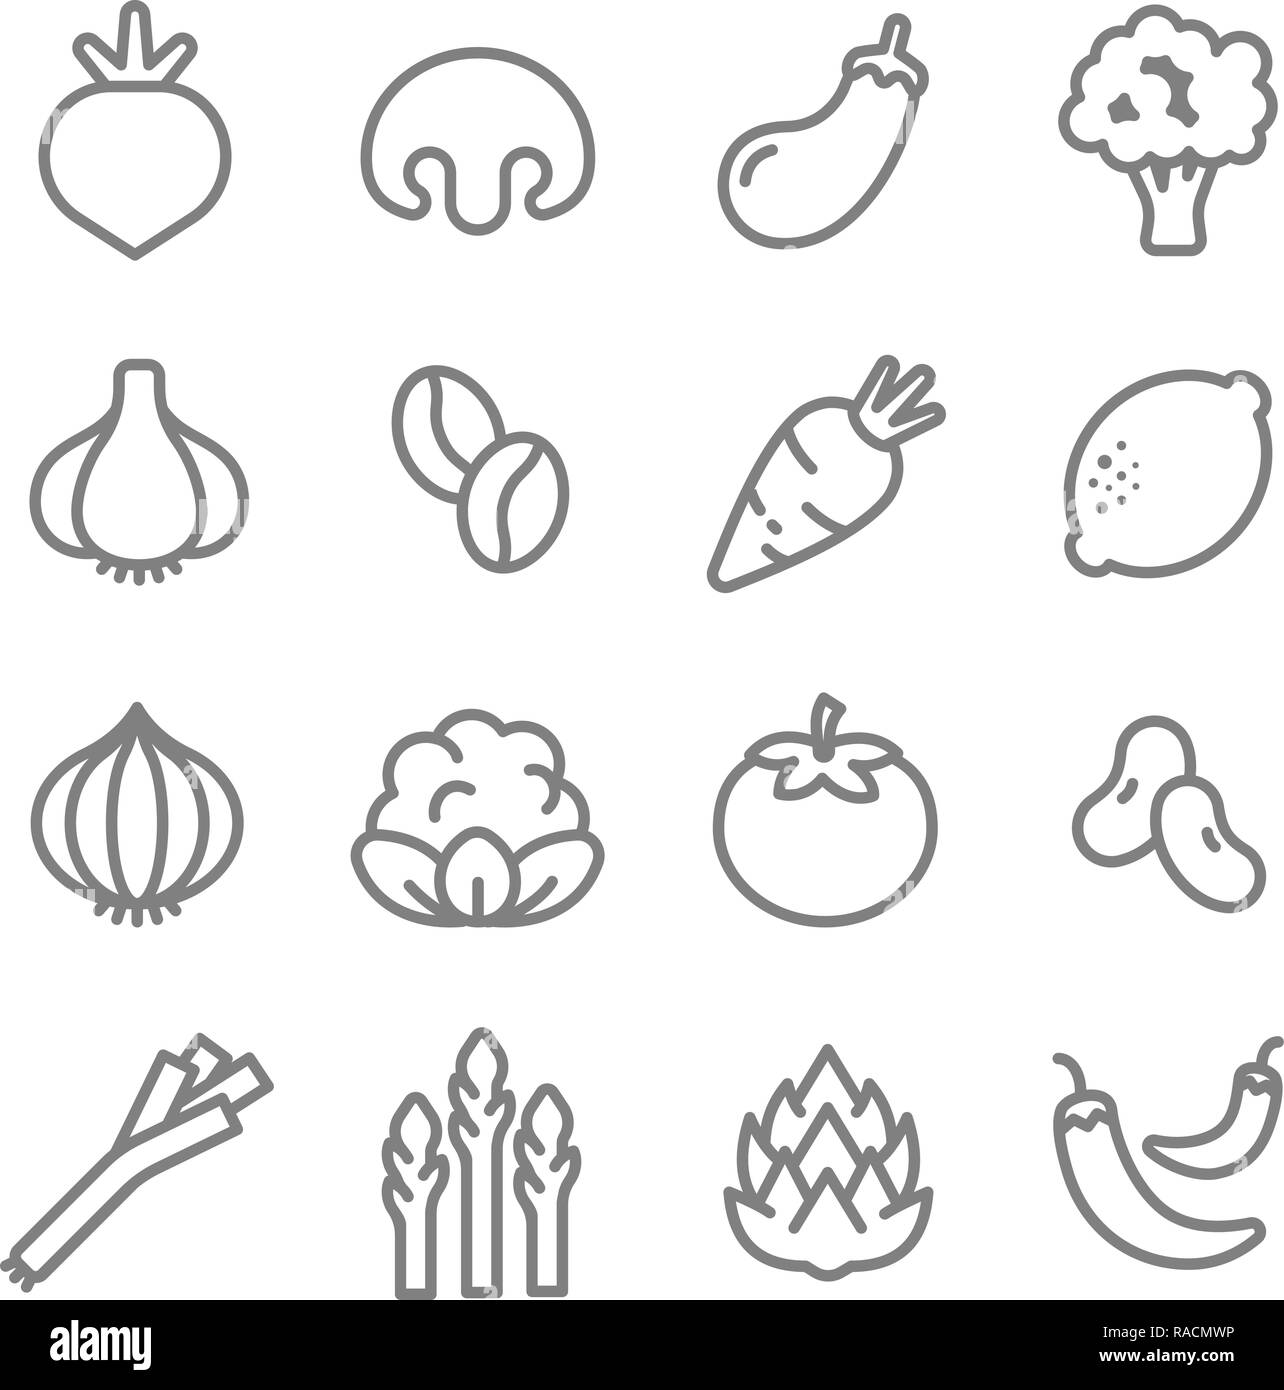 Vegetable ingredients line icon vector set. Including Carrot, Tomato, Chilies, Asparagus, Artichokes, Onion, Radish and more Stock Vector